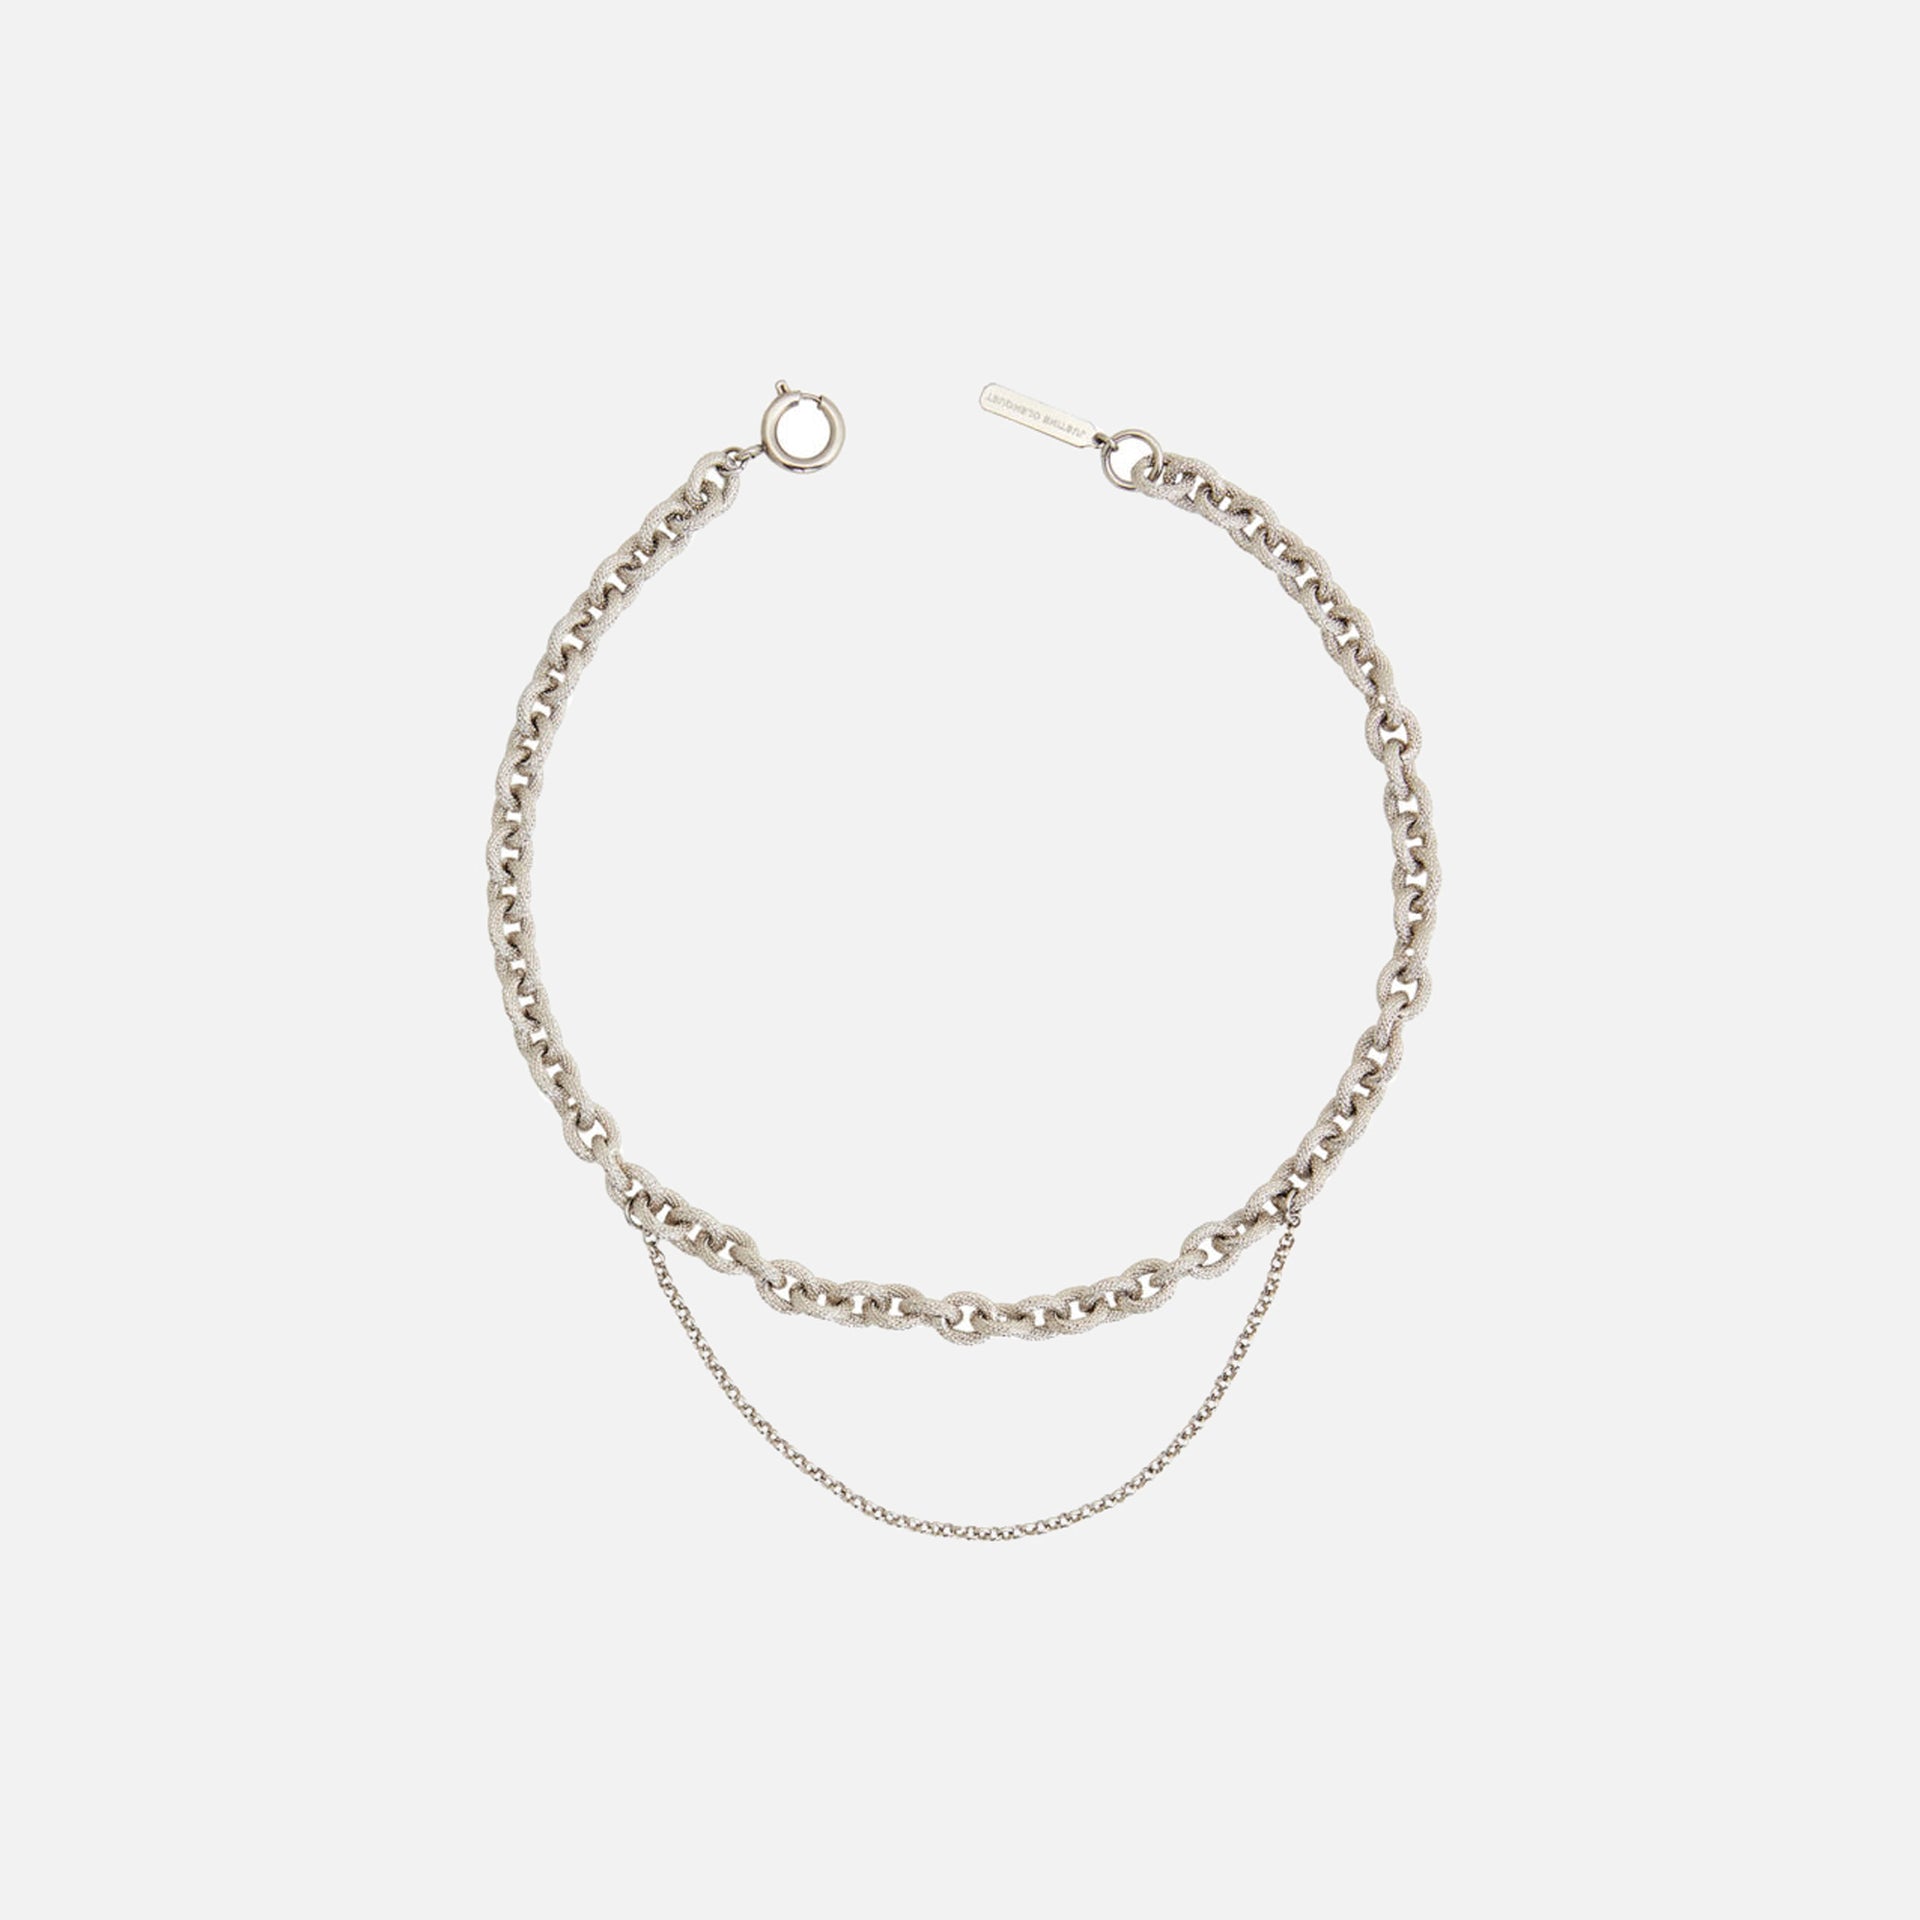 Justine Clenquet Louise Necklace